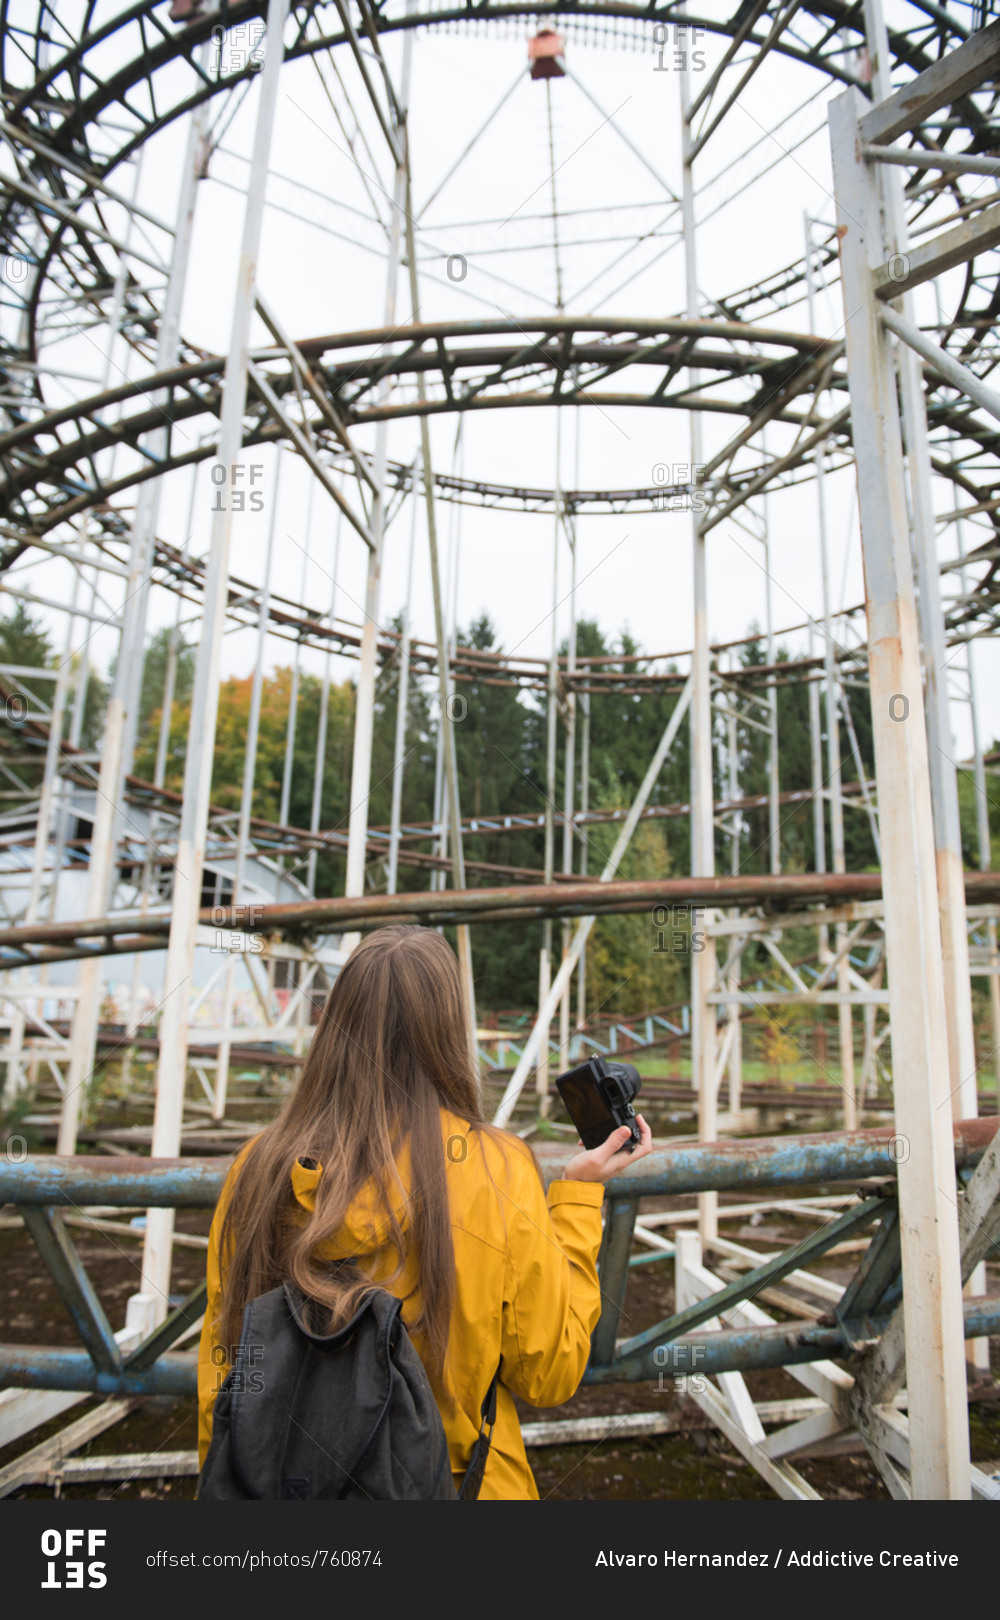 Back view of blond woman with camera taking photo of desolated amusement park with attractions